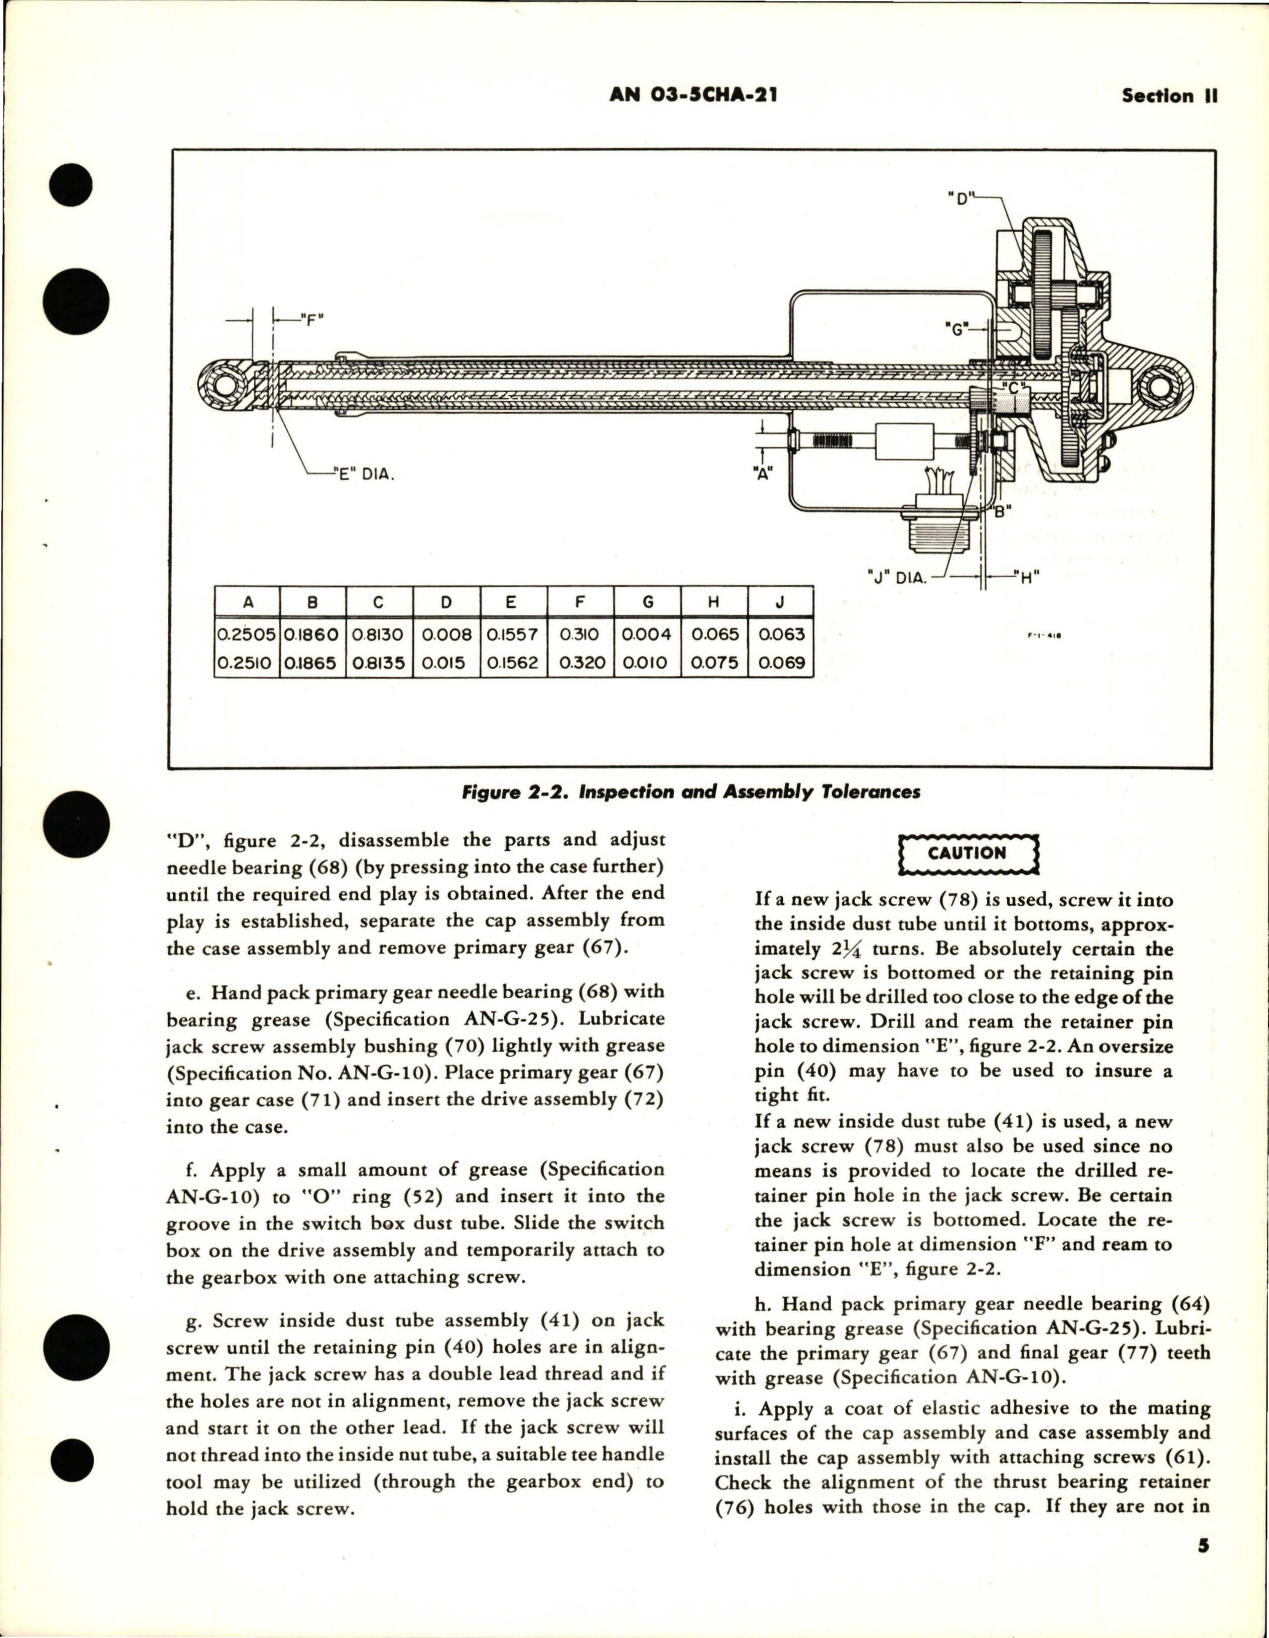 Sample page 7 from AirCorps Library document: Overhaul Instructions for Electro-Mechanical Linear Actuators - Parts 30582 and 31534